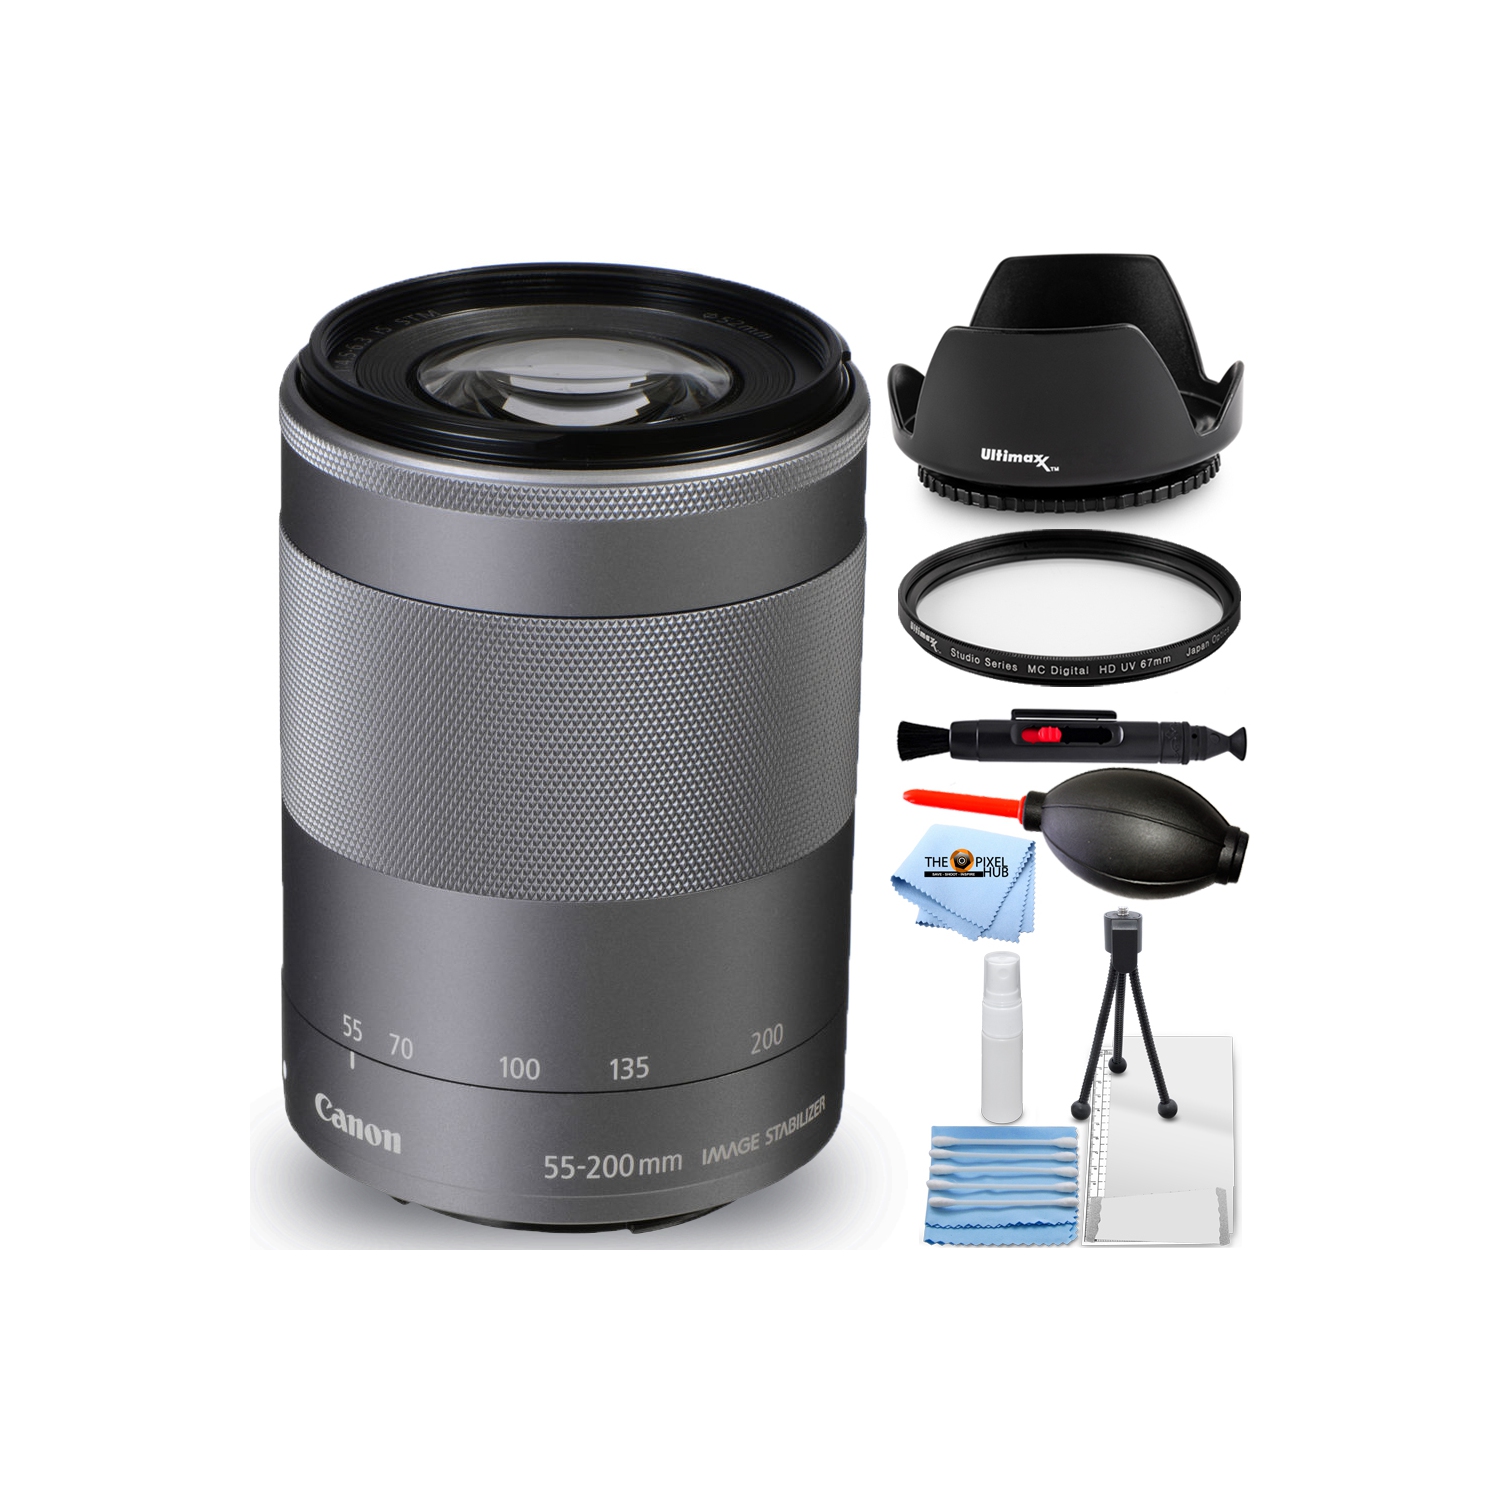 Canon EF-M 55-200mm f/4.5-6.3 IS STM Lens (Silver) 1122C002 - 7PC 